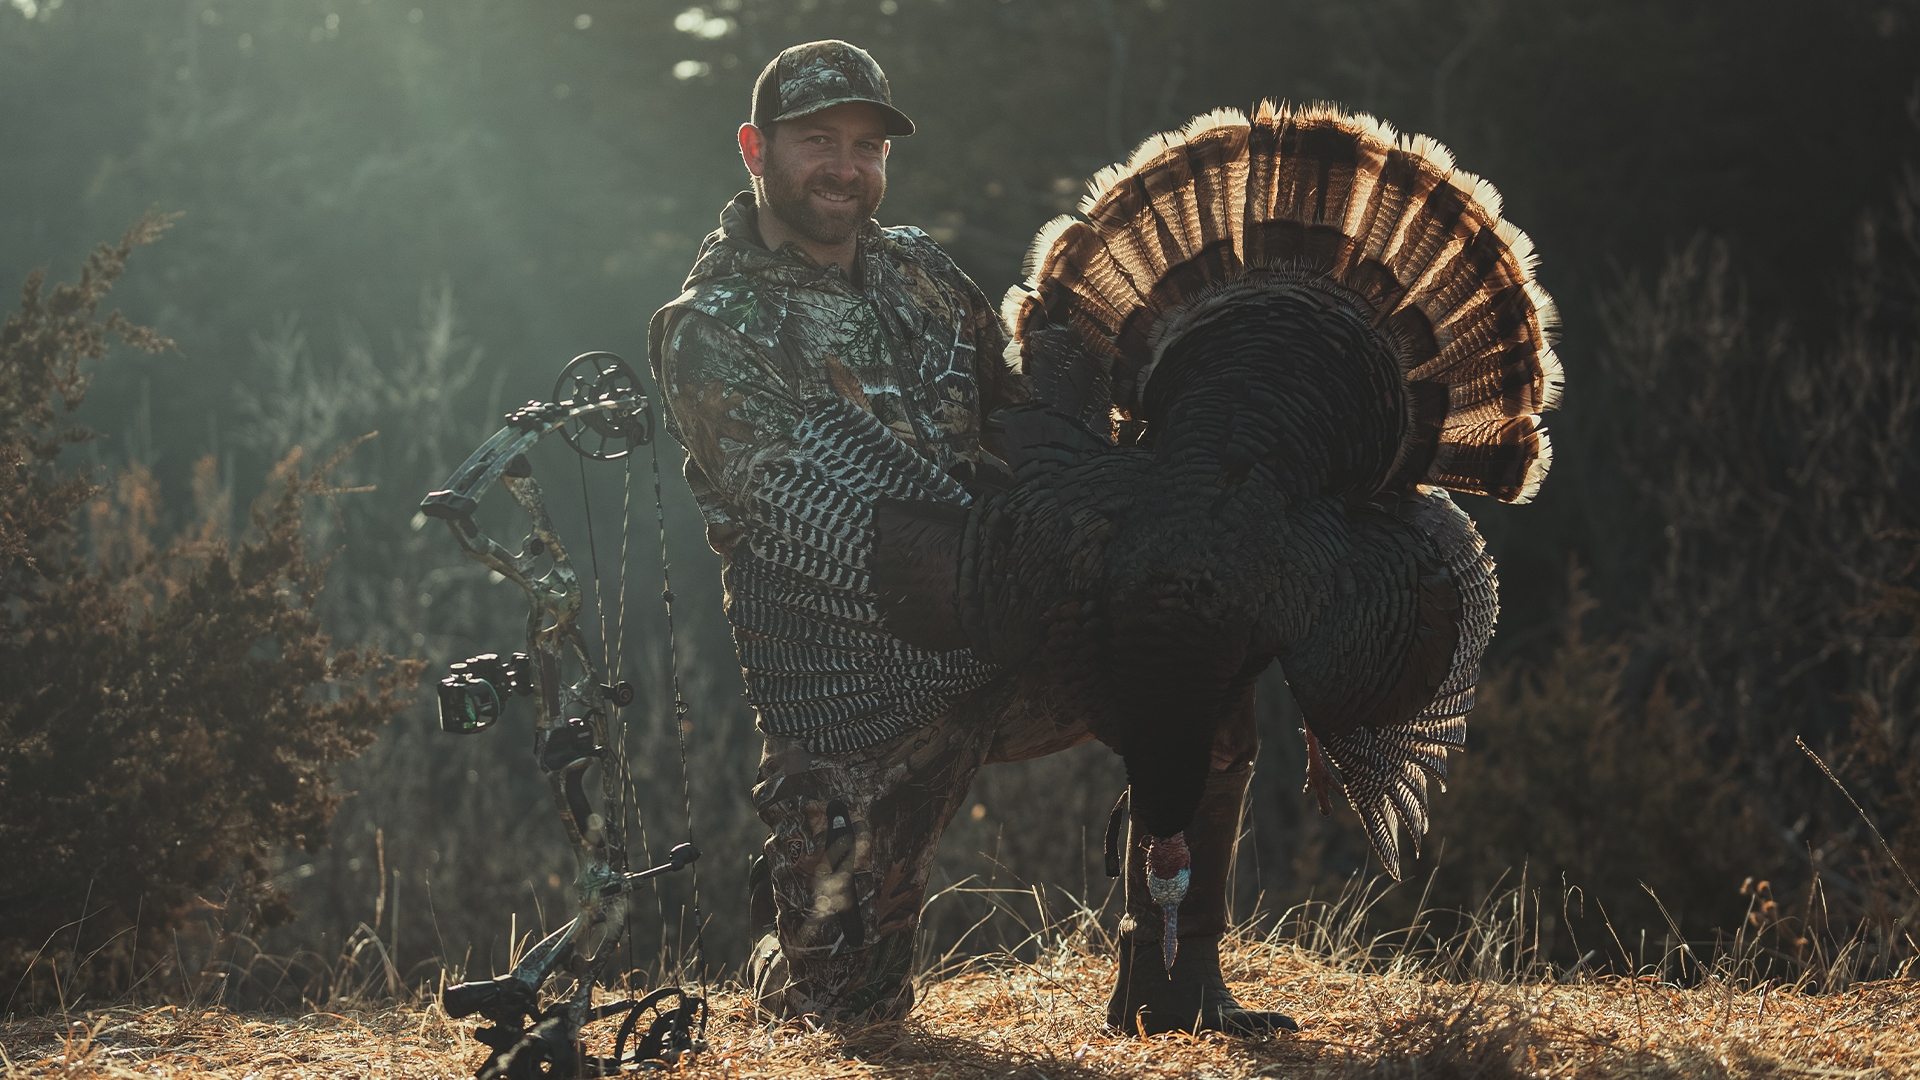 Image relating to Bowhunting Turkeys for Beginners